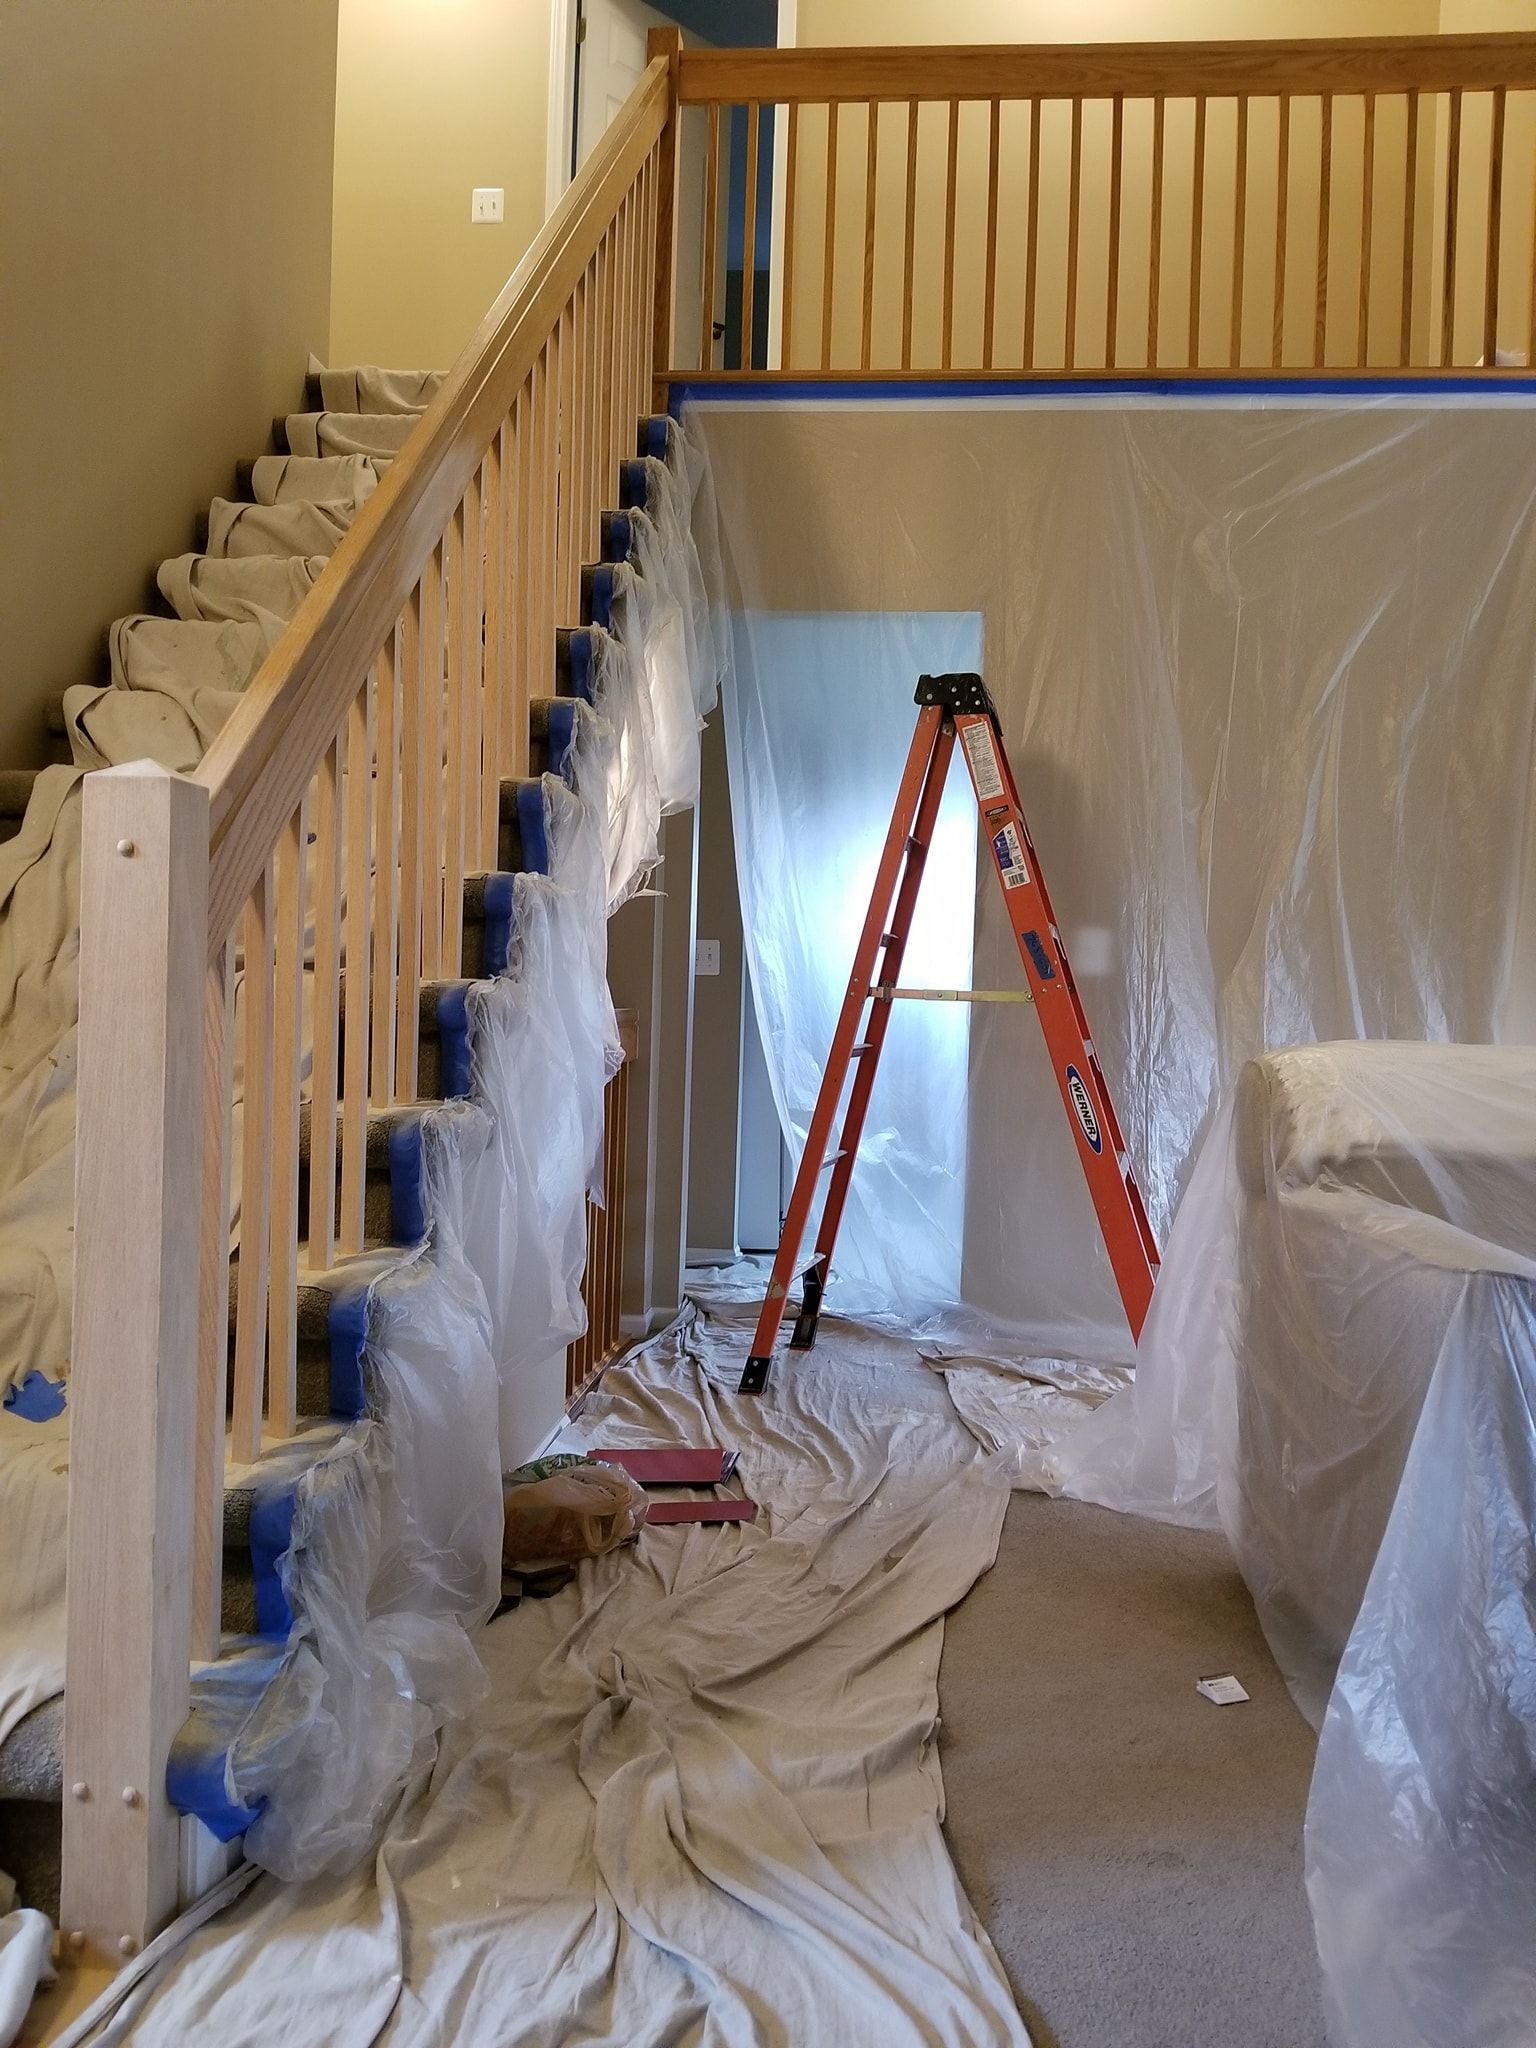 A room with stairs and a ladder covered in plastic